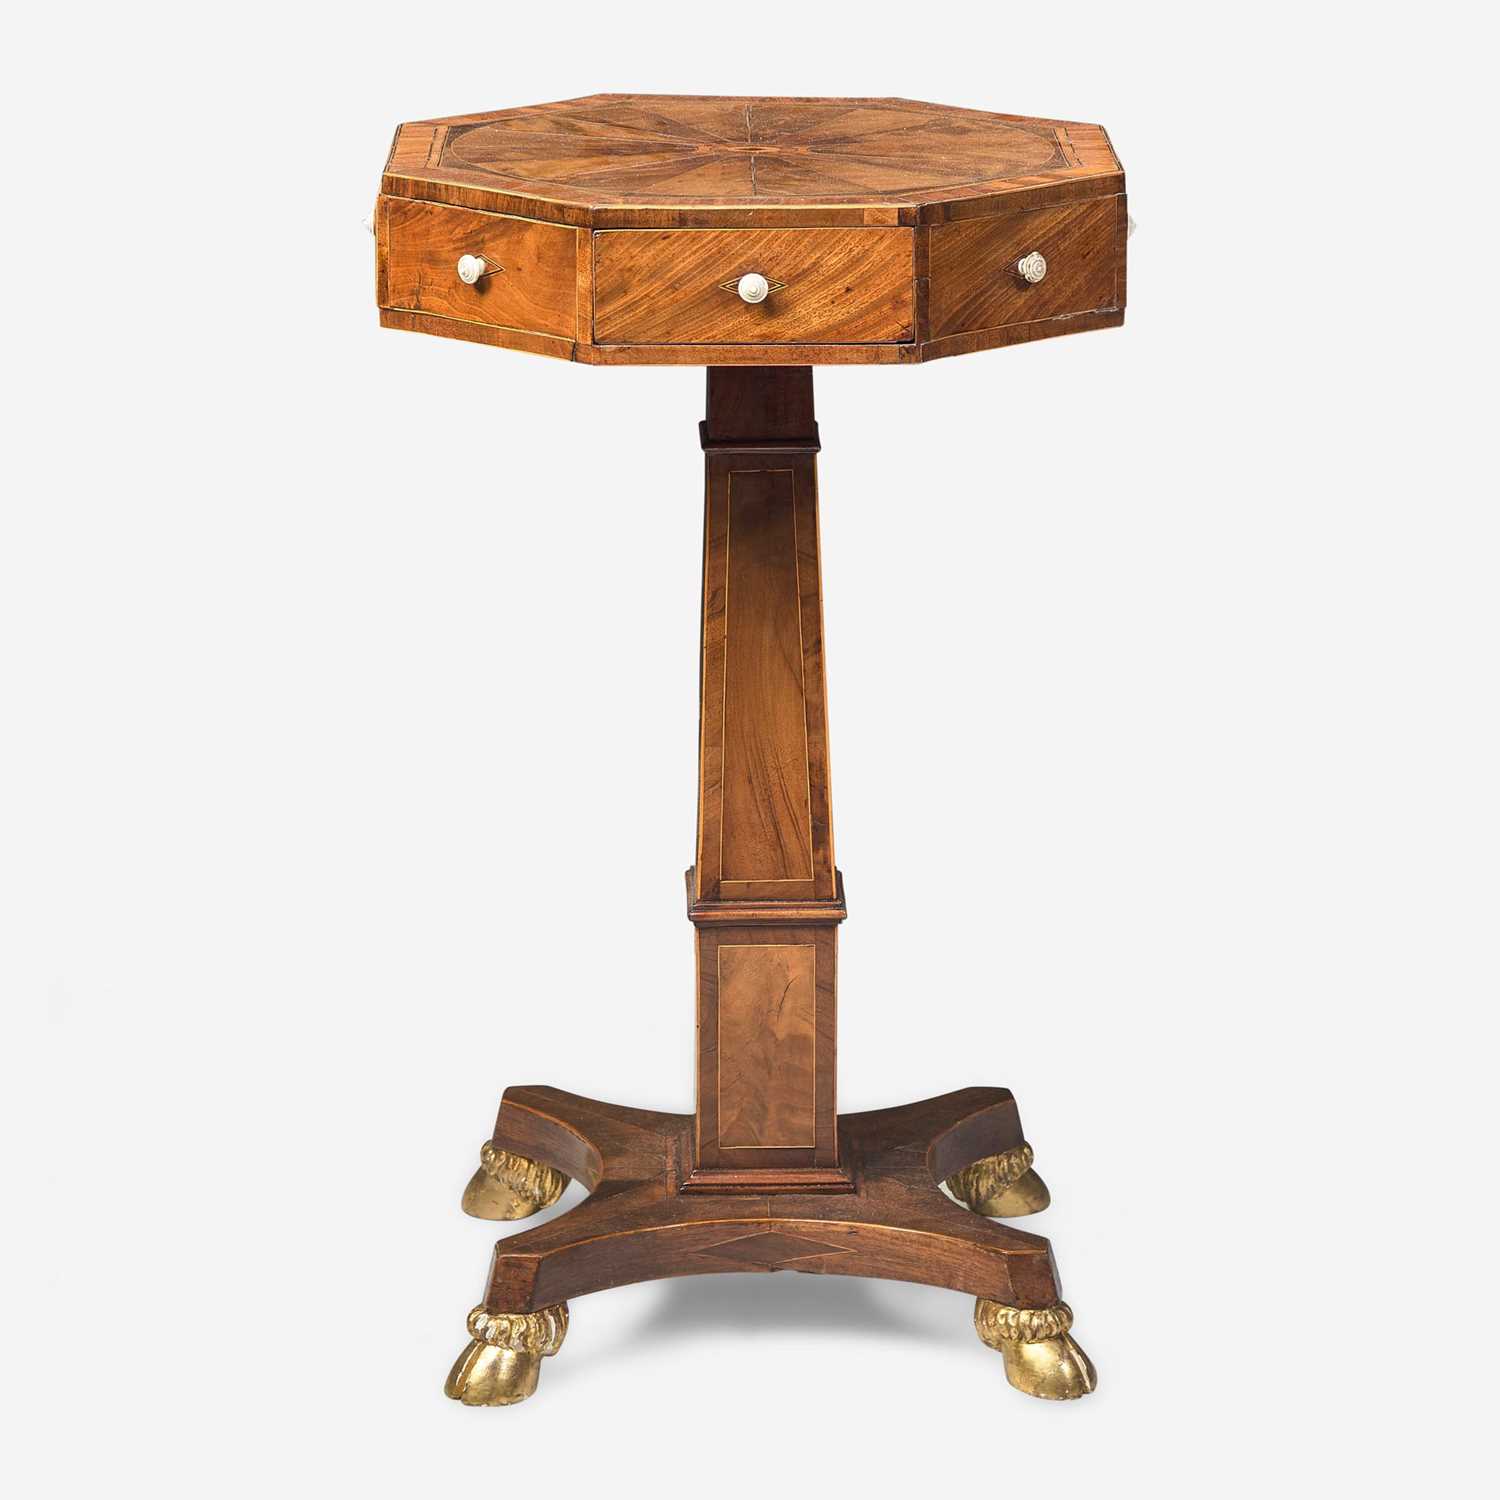 Lot 37 - A Regency octagonal inlaid mahogany and satinwood occasional table